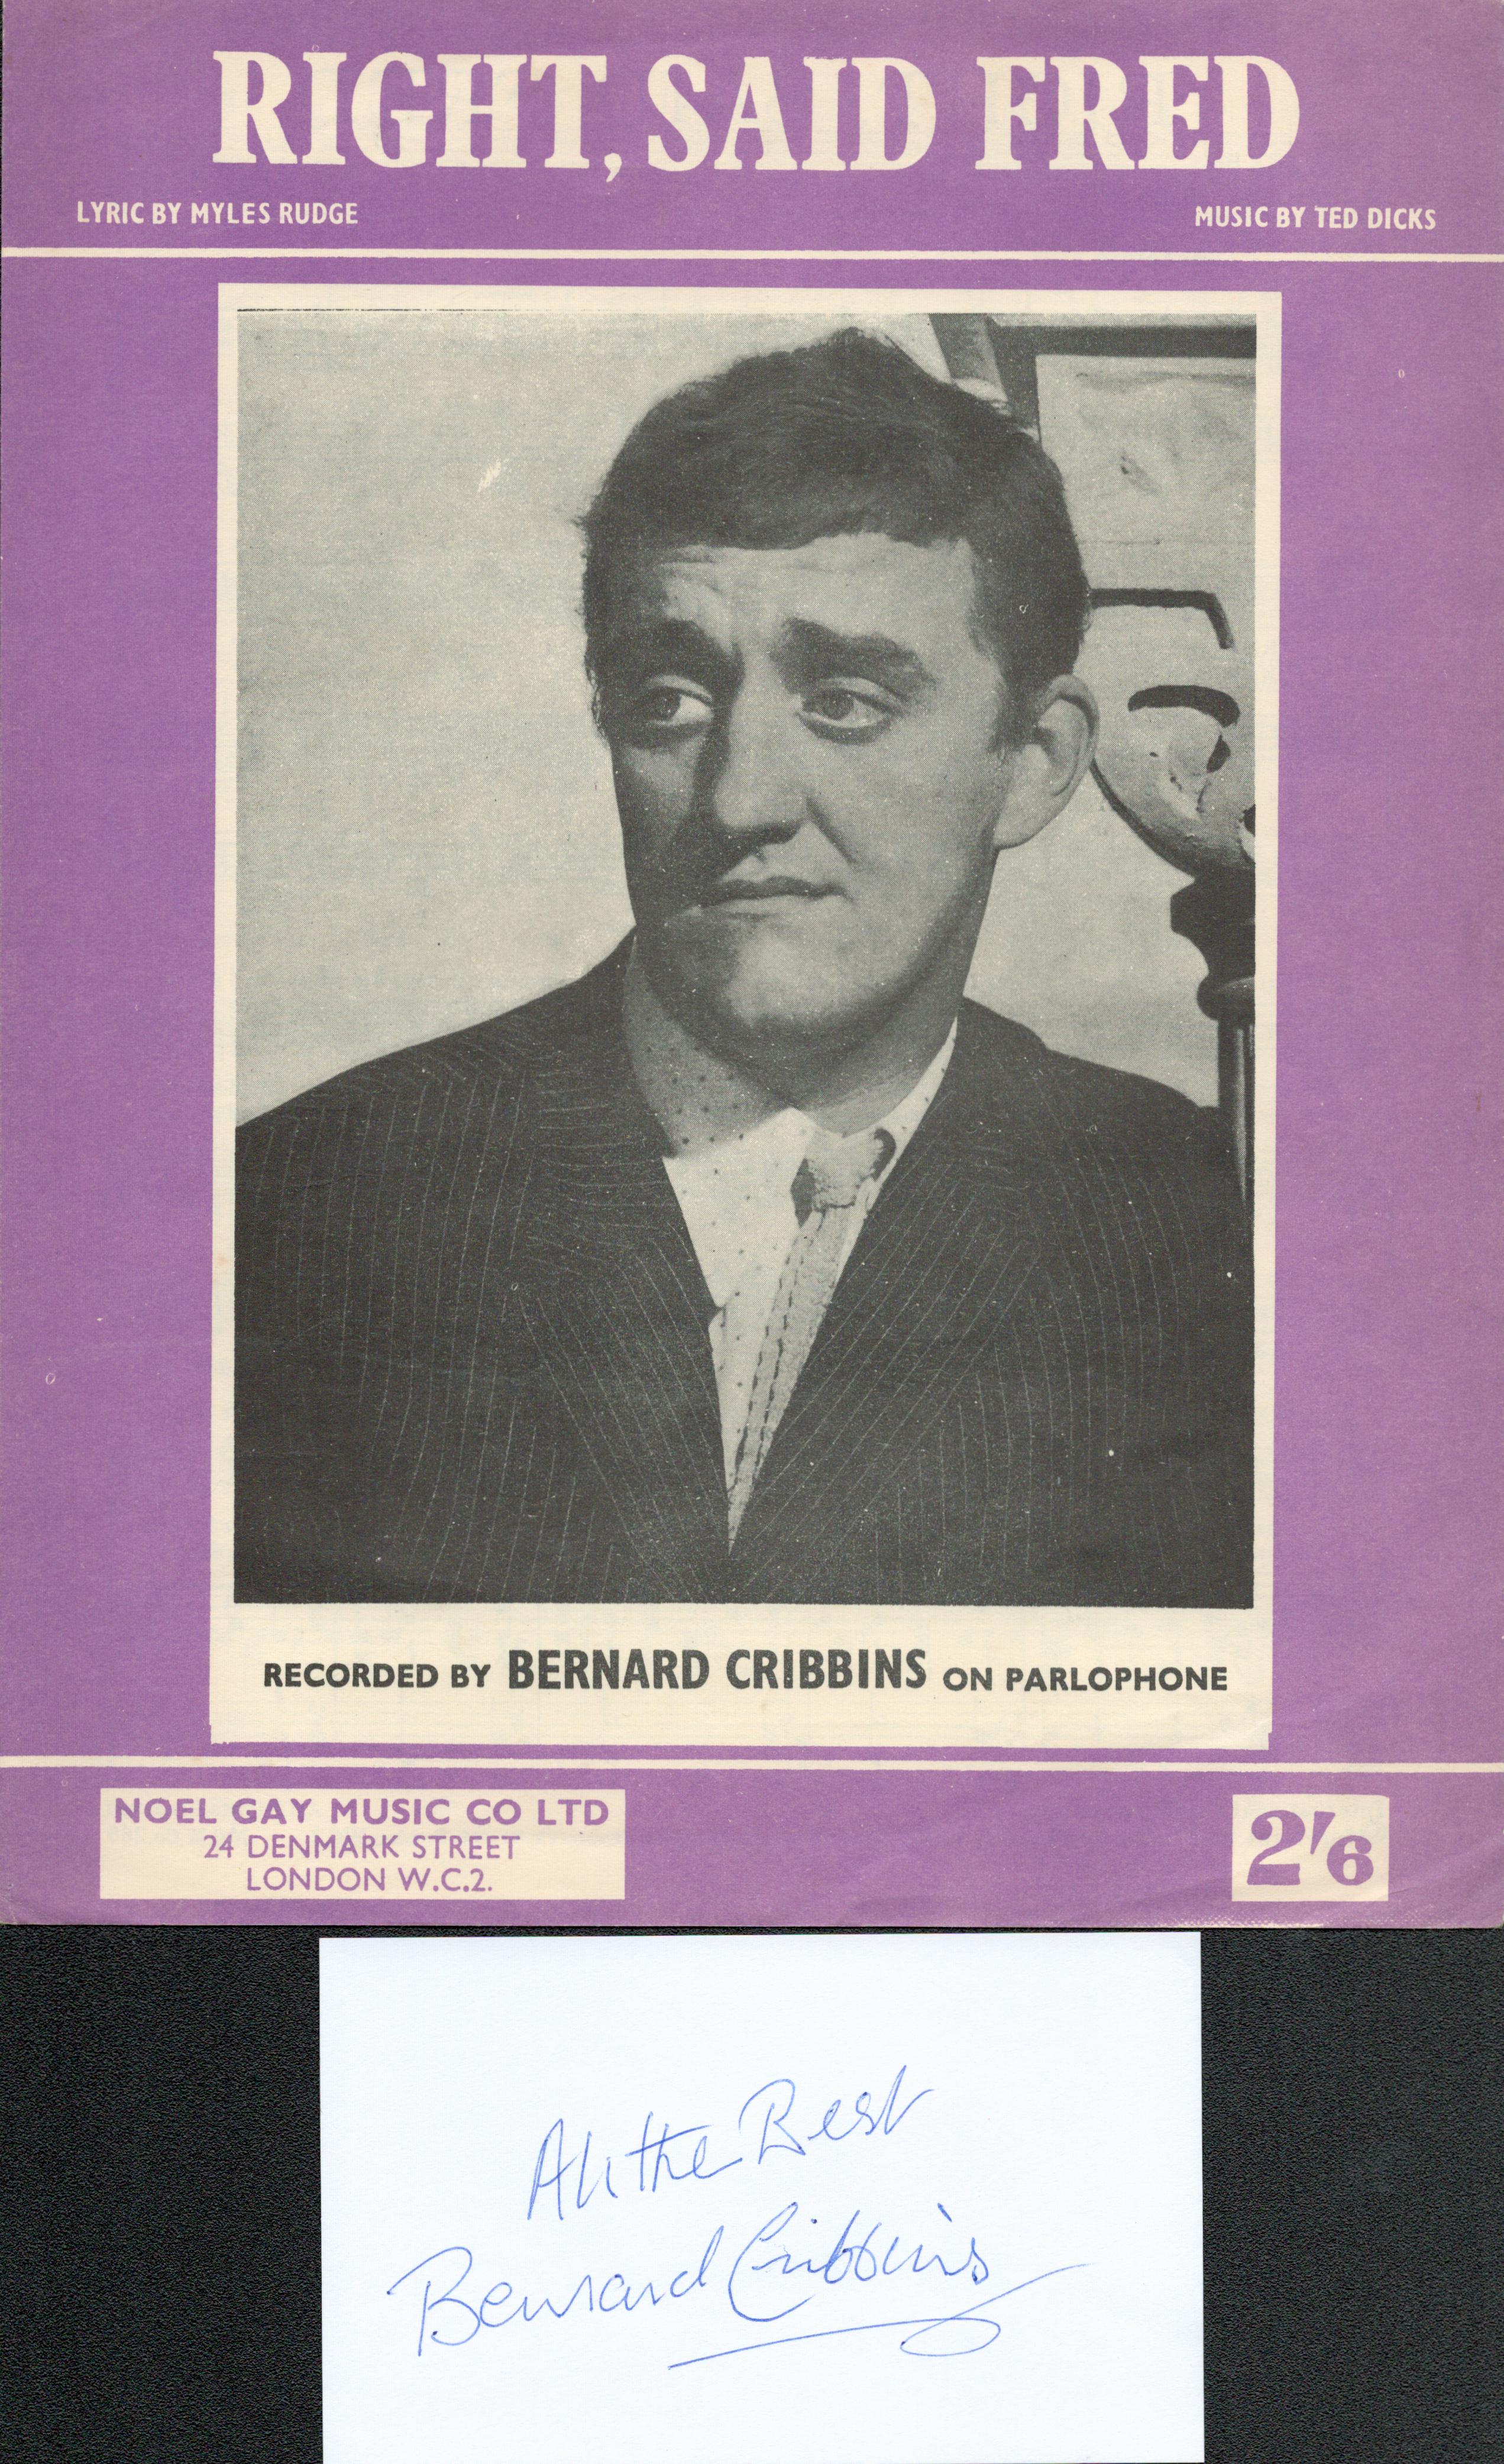 Bernard Cribbins Actor Signed Card With Right Said Fred Vintage Sheet Music. Good condition. All